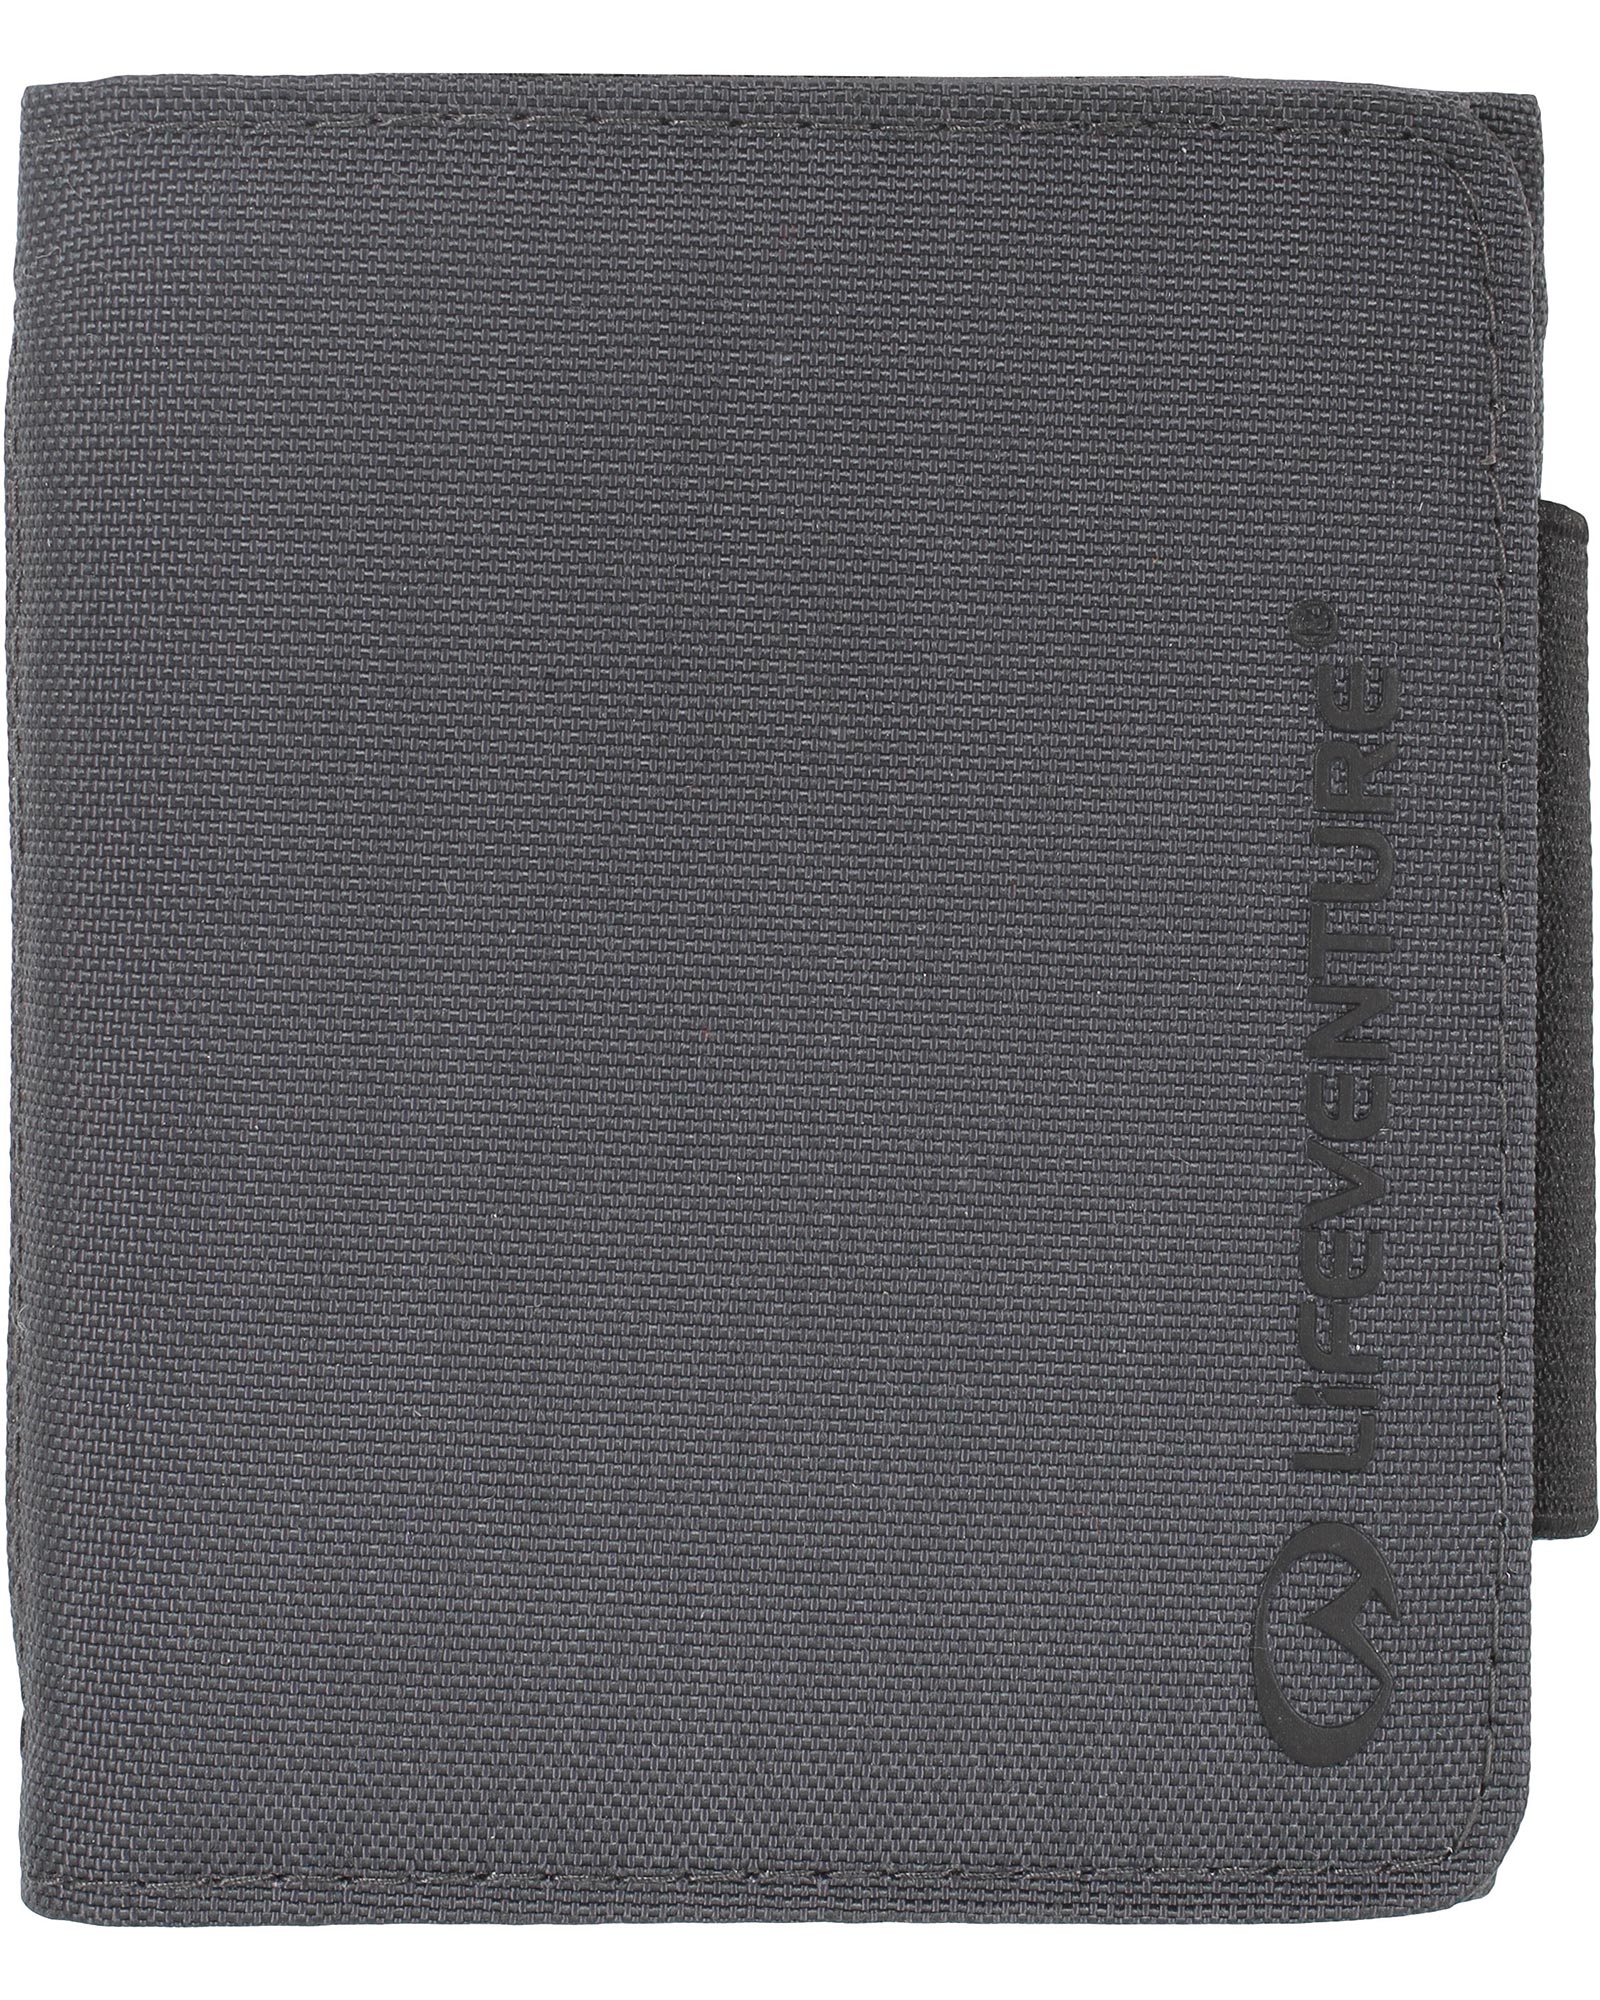 Product image of Lifeventure RFiD Wallet - Recycled